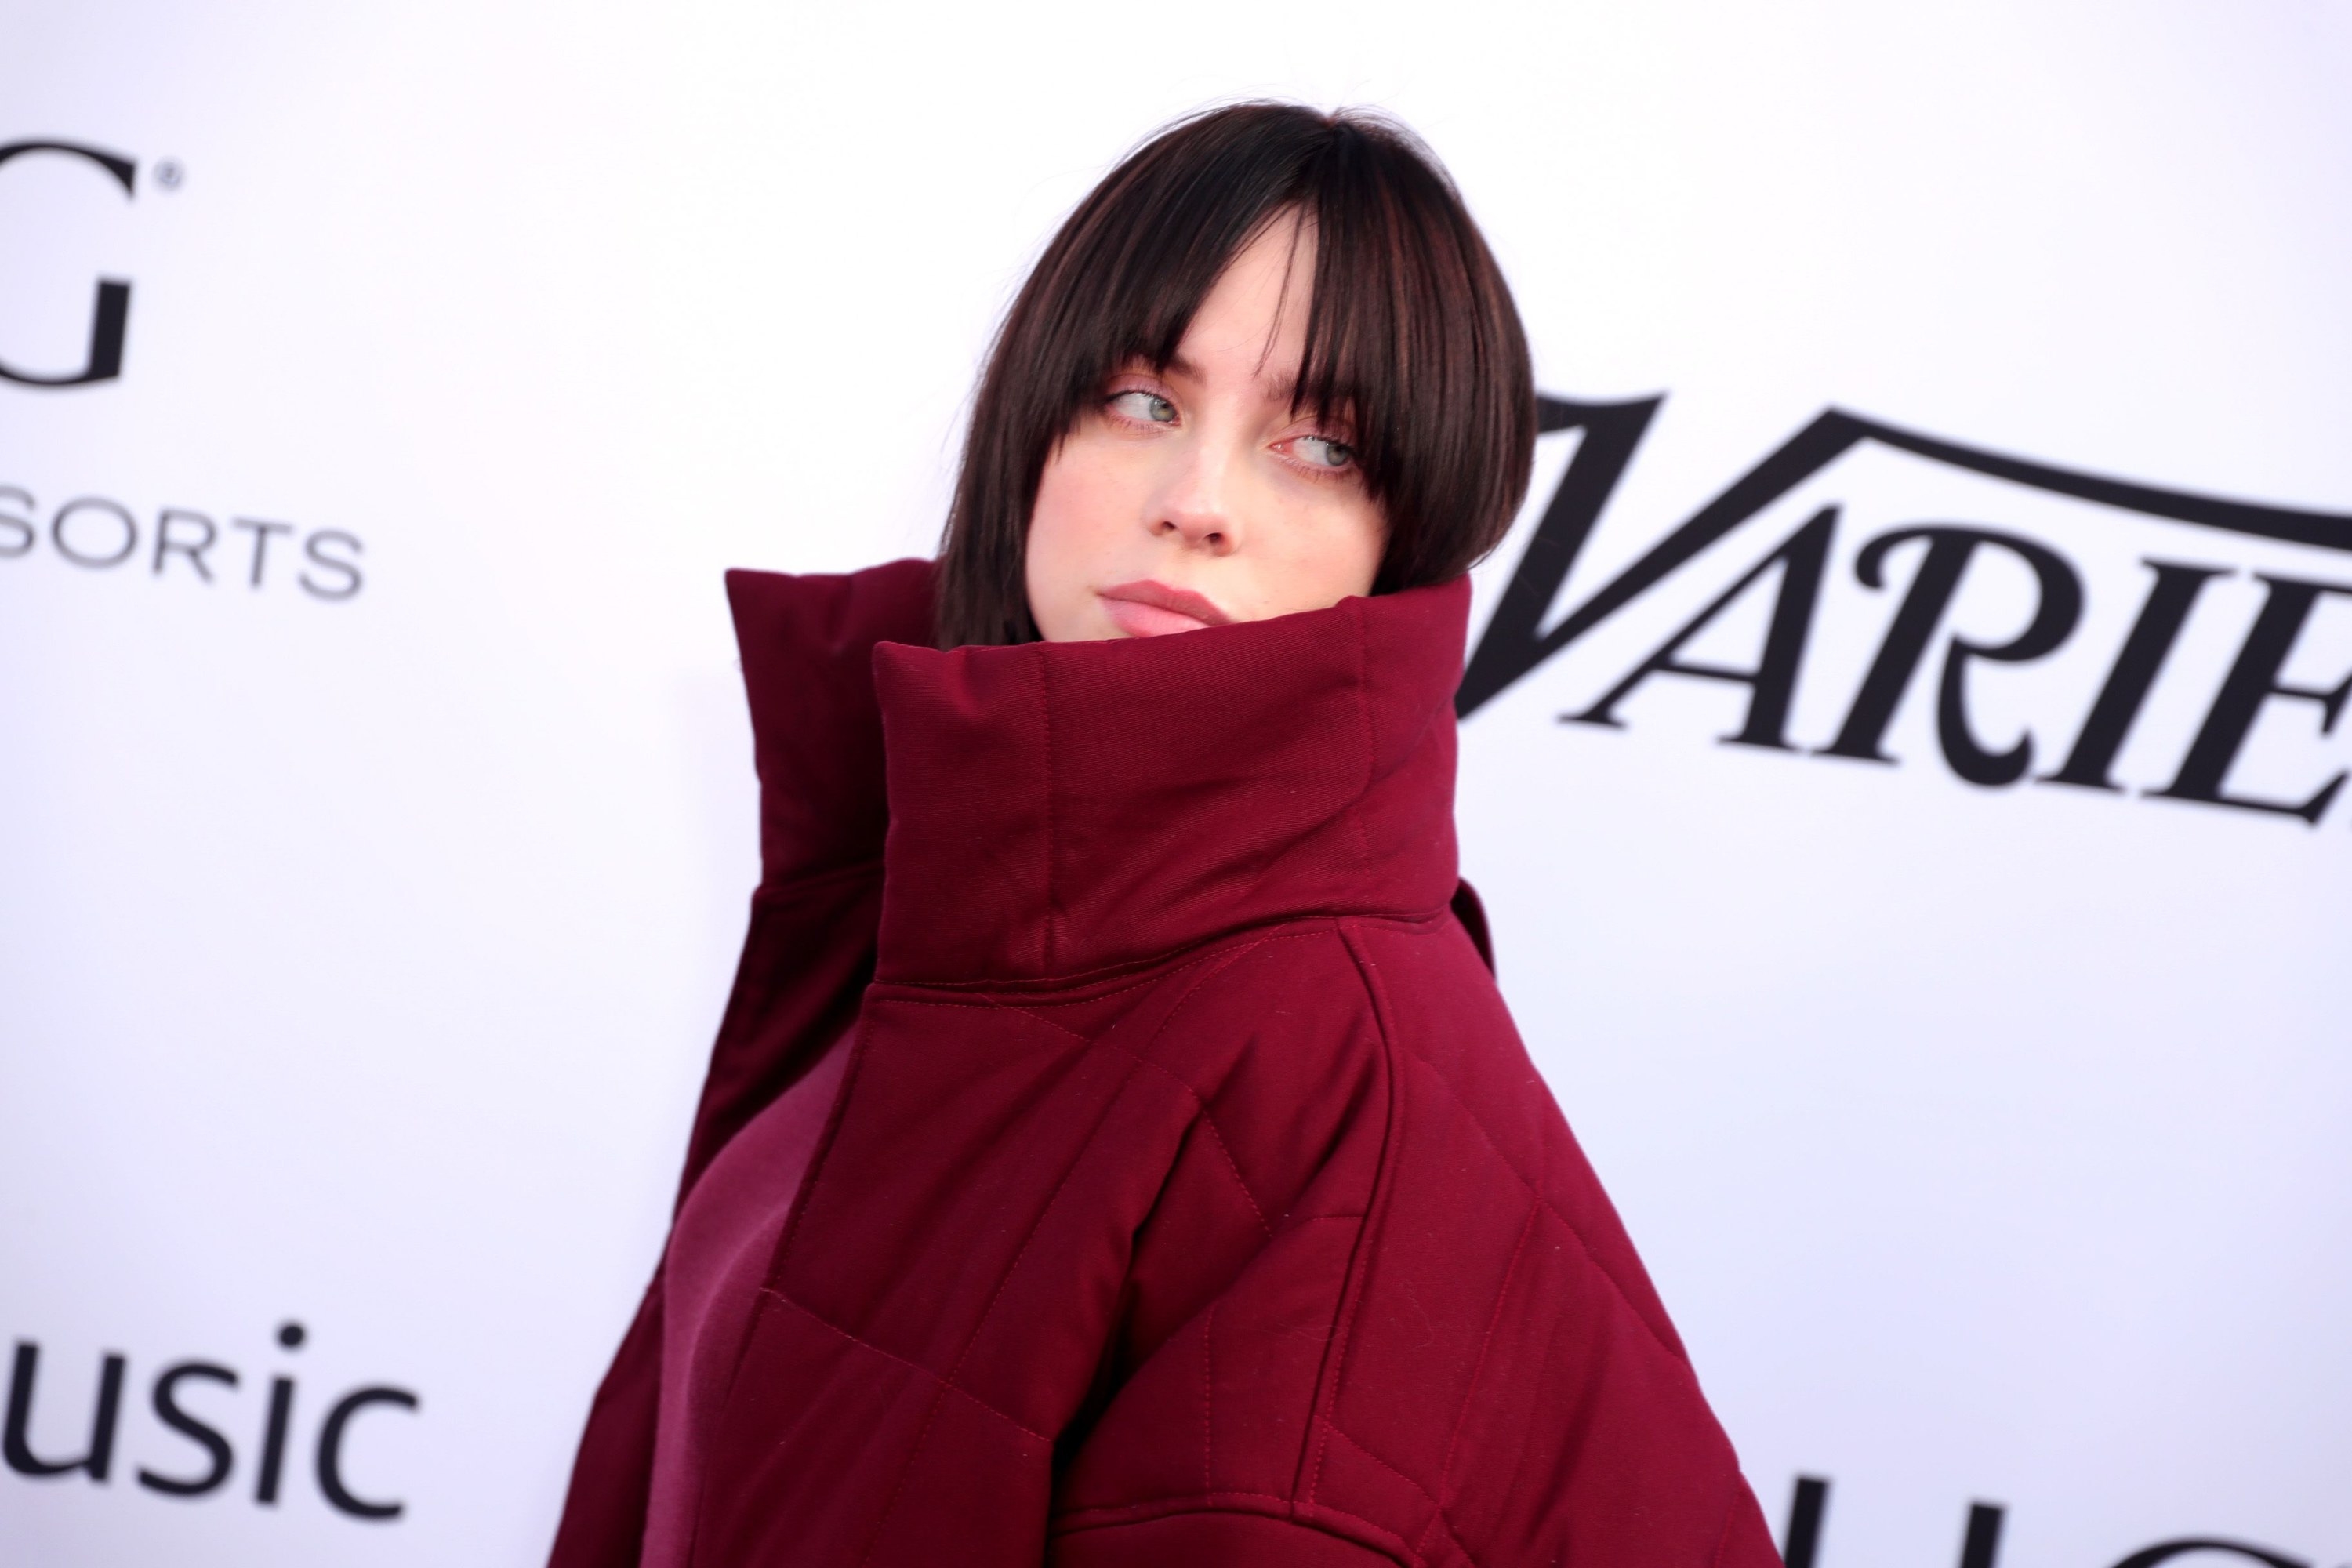 Close-up of Billie in a puffy coat at a red carpet event